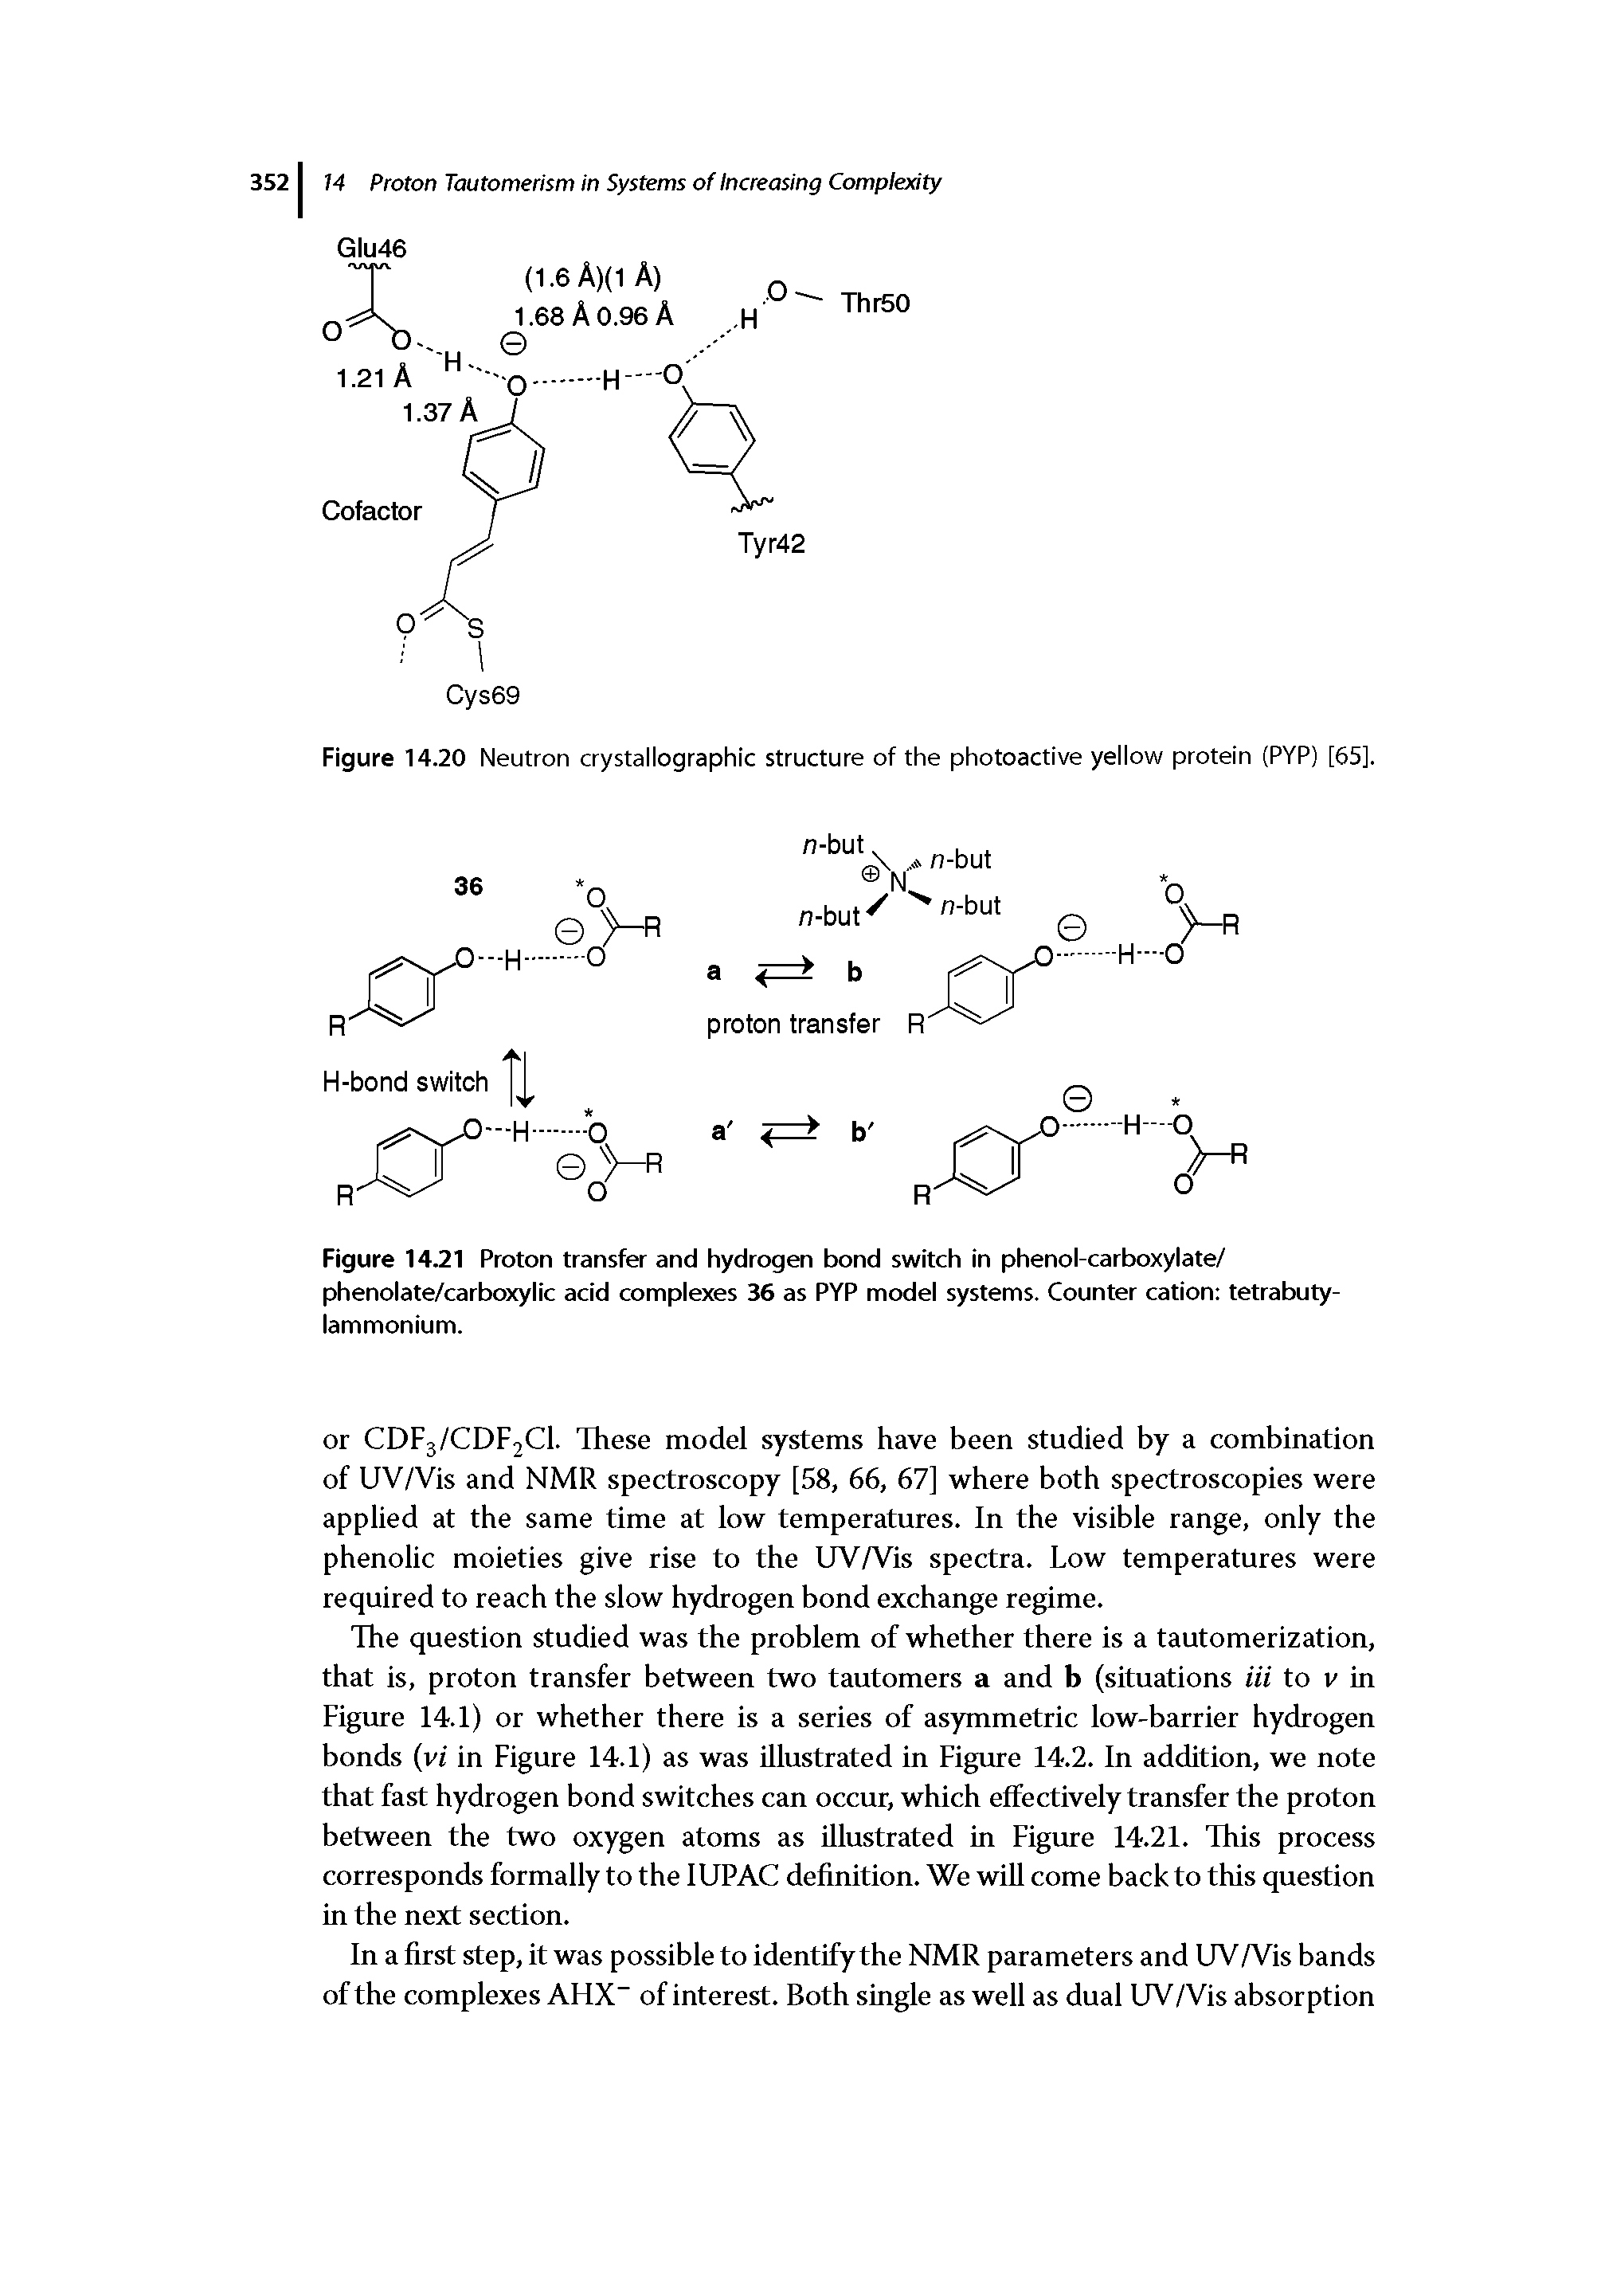 Figure 14.21 Proton transfer and hydrogen bond switch in phenol-carboxylate/ phenolate/carboxylic acid complexes 36 as PYP model systems. Counter cation tetrabuty-lammonium.